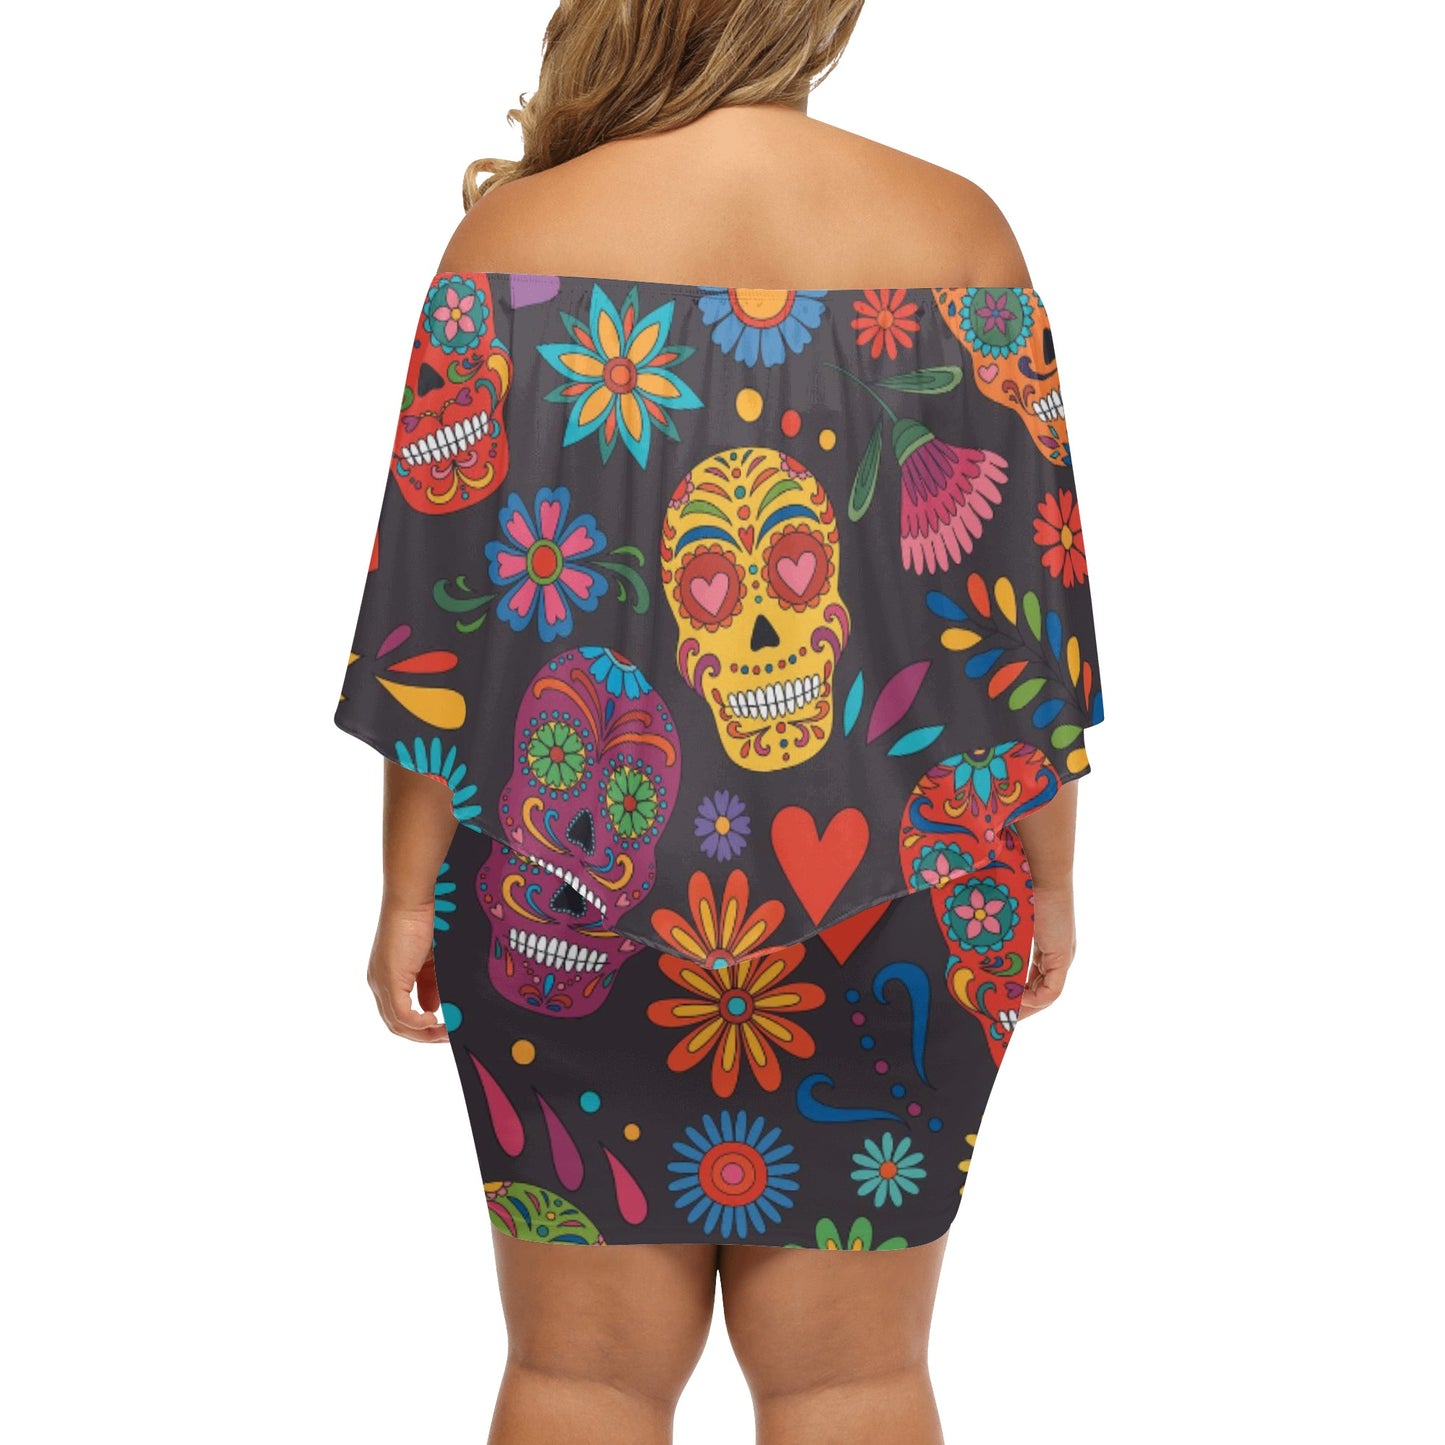 Sugar skull Day of the dead Mexican skull Women's Off-the-shoulder Tube Dress